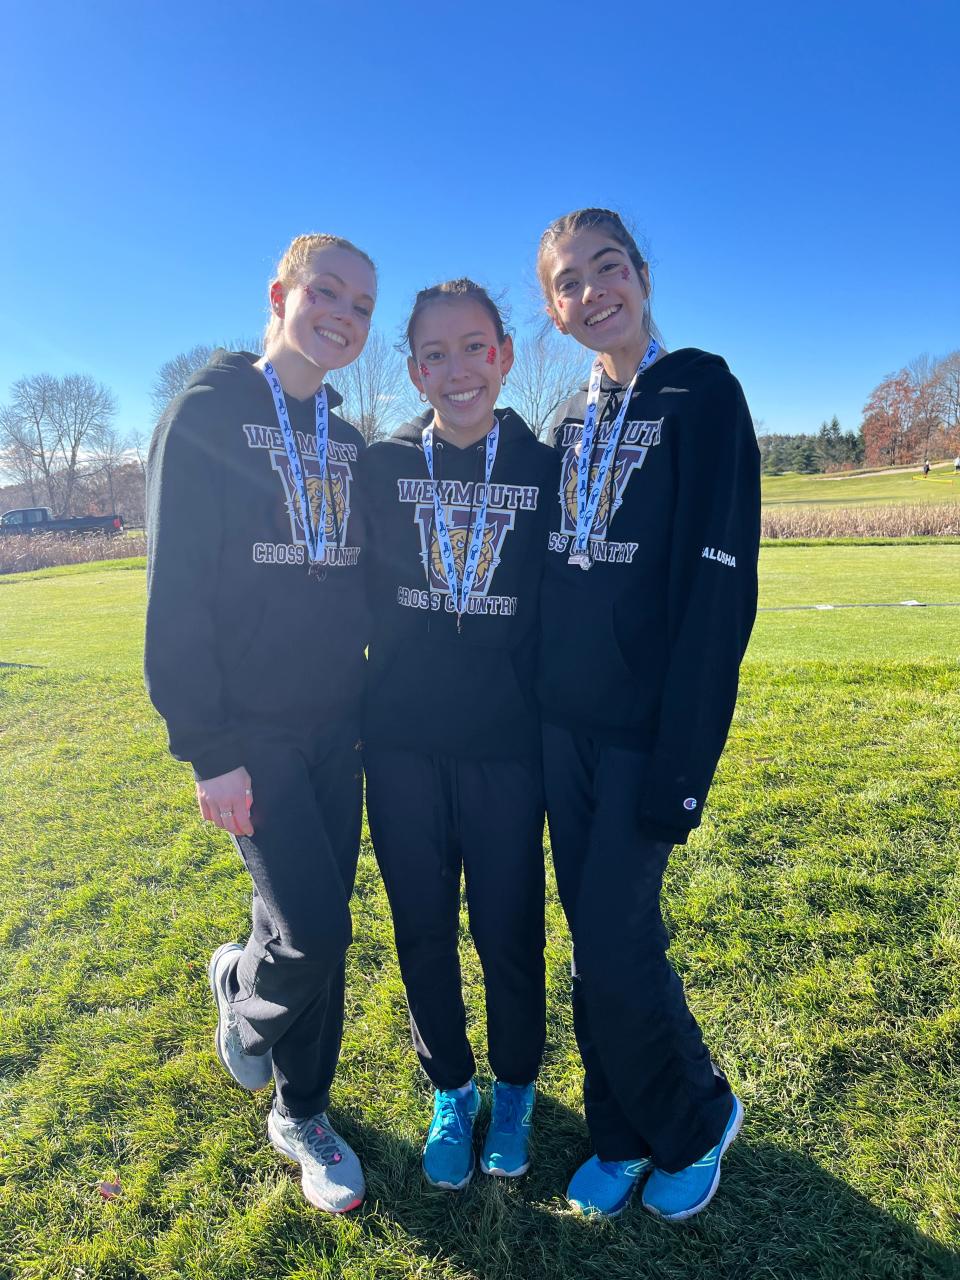 From left to right, Gracie Richard, Kate Carnes and Izzy Galusha helped the Weymouth High girls cross country team place second overall in the Div. 1A race at Gardner Golf Course.